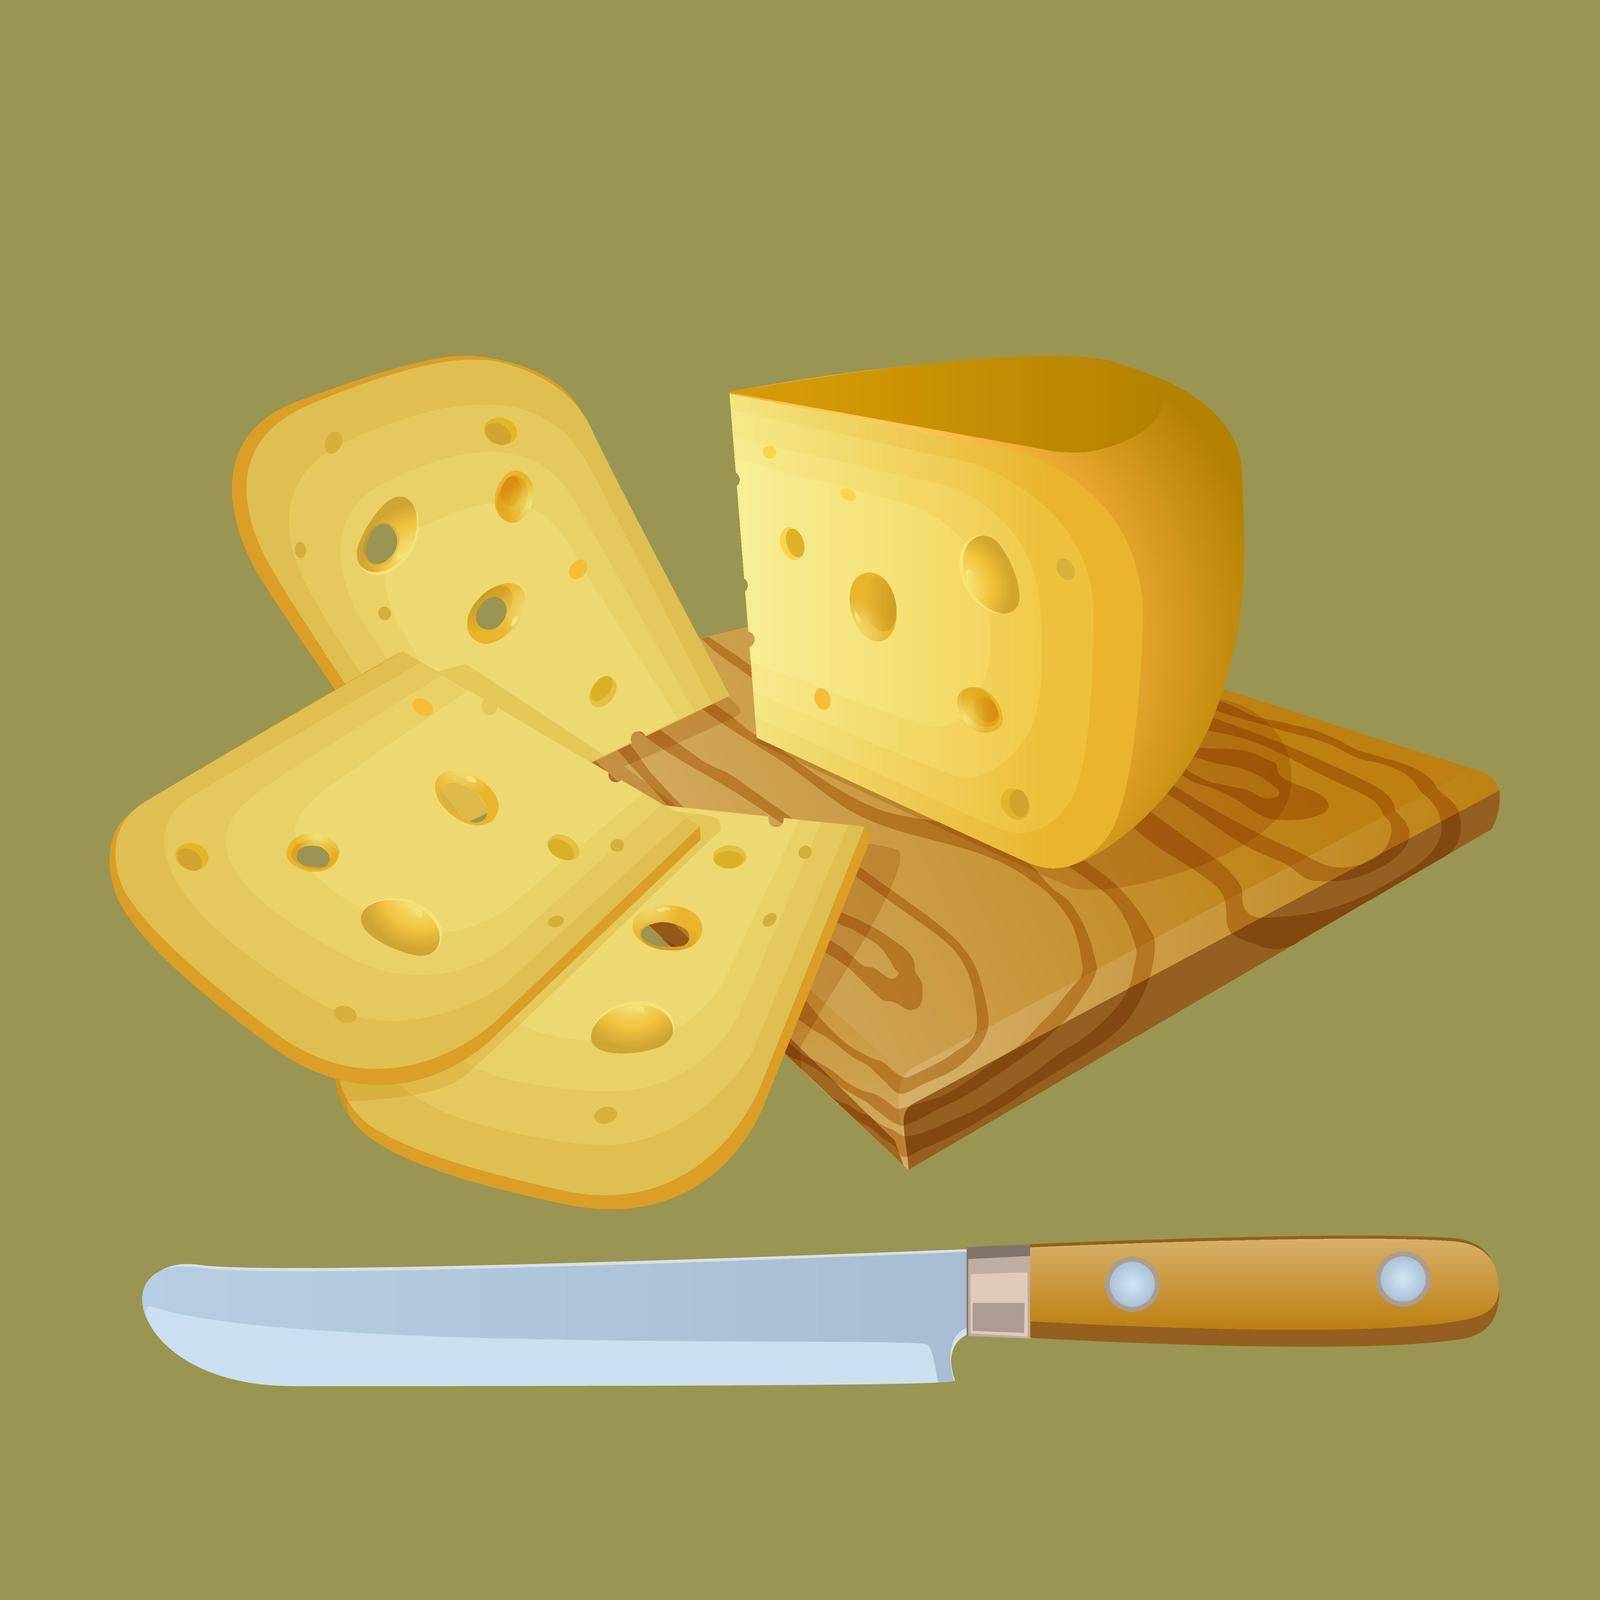 Cheese cut into chunks. Kitchen cutting board. Knife for slicing cheese. Stock Vector illustration.